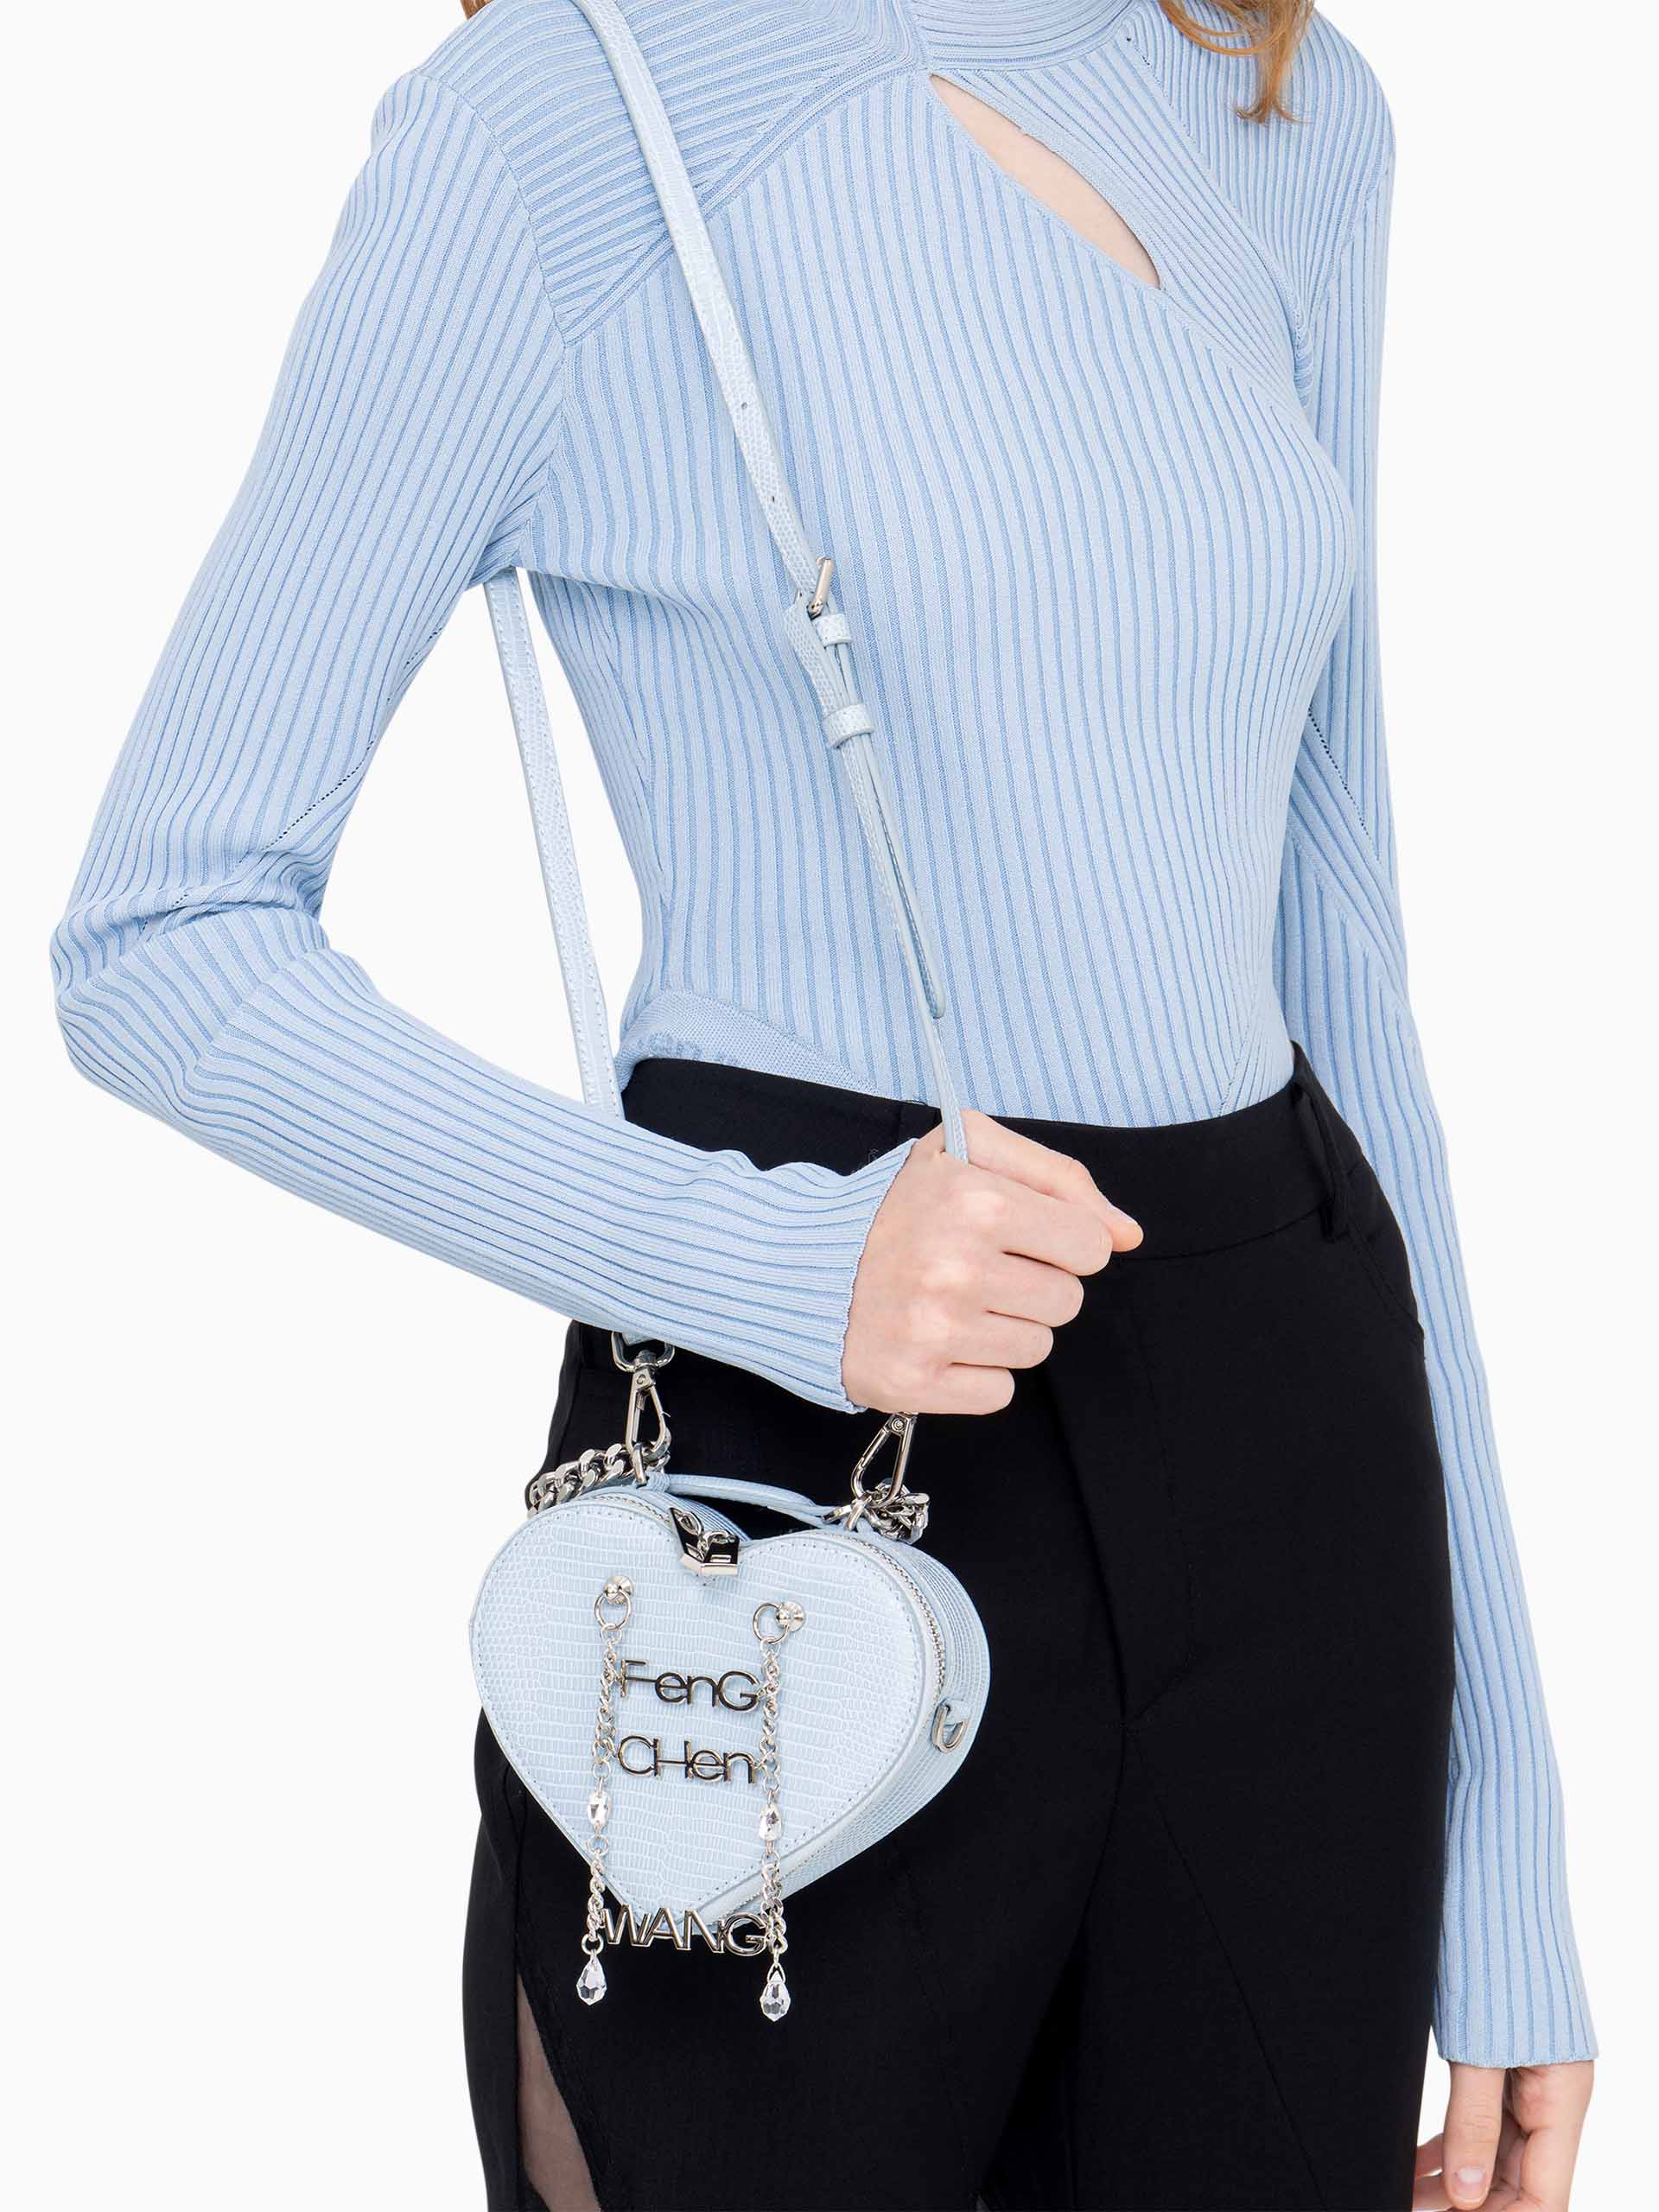 Heart bag – Hellow by Omayra Online Boutique